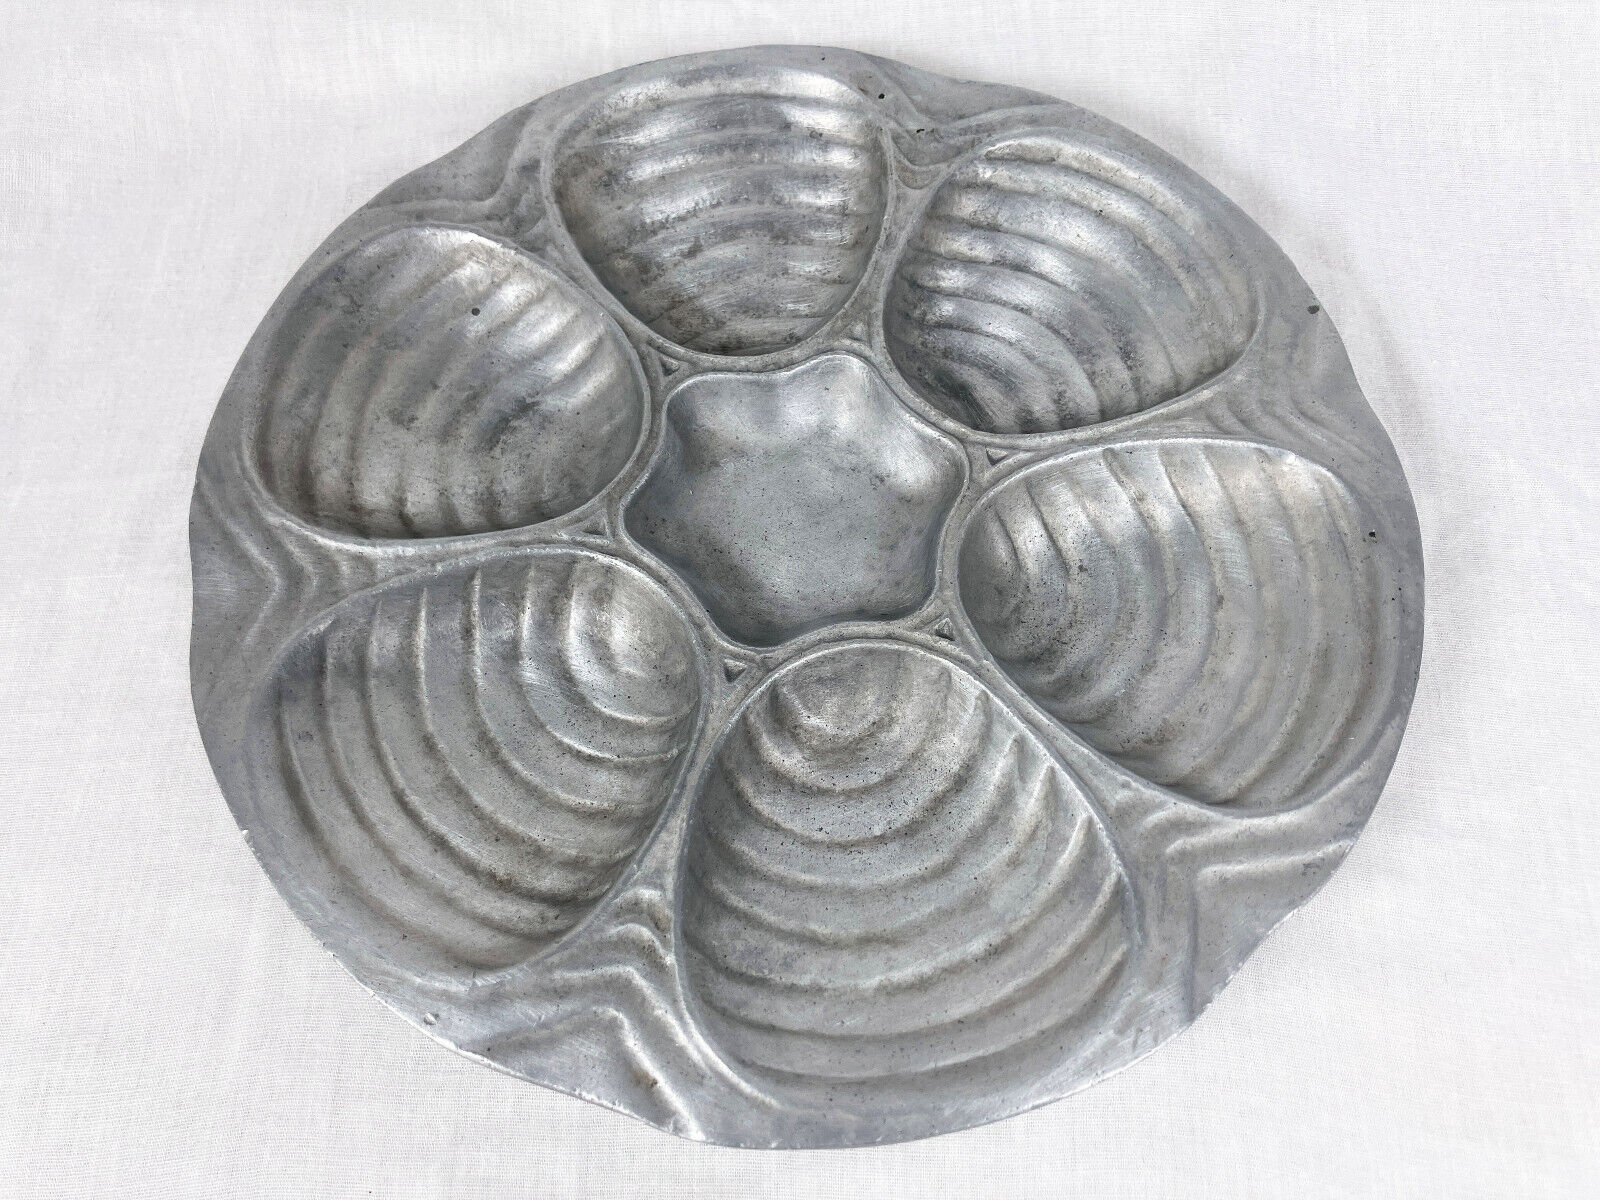 Bon Chef 10 Inch Aluminum Oyster Plate with 6 Sections